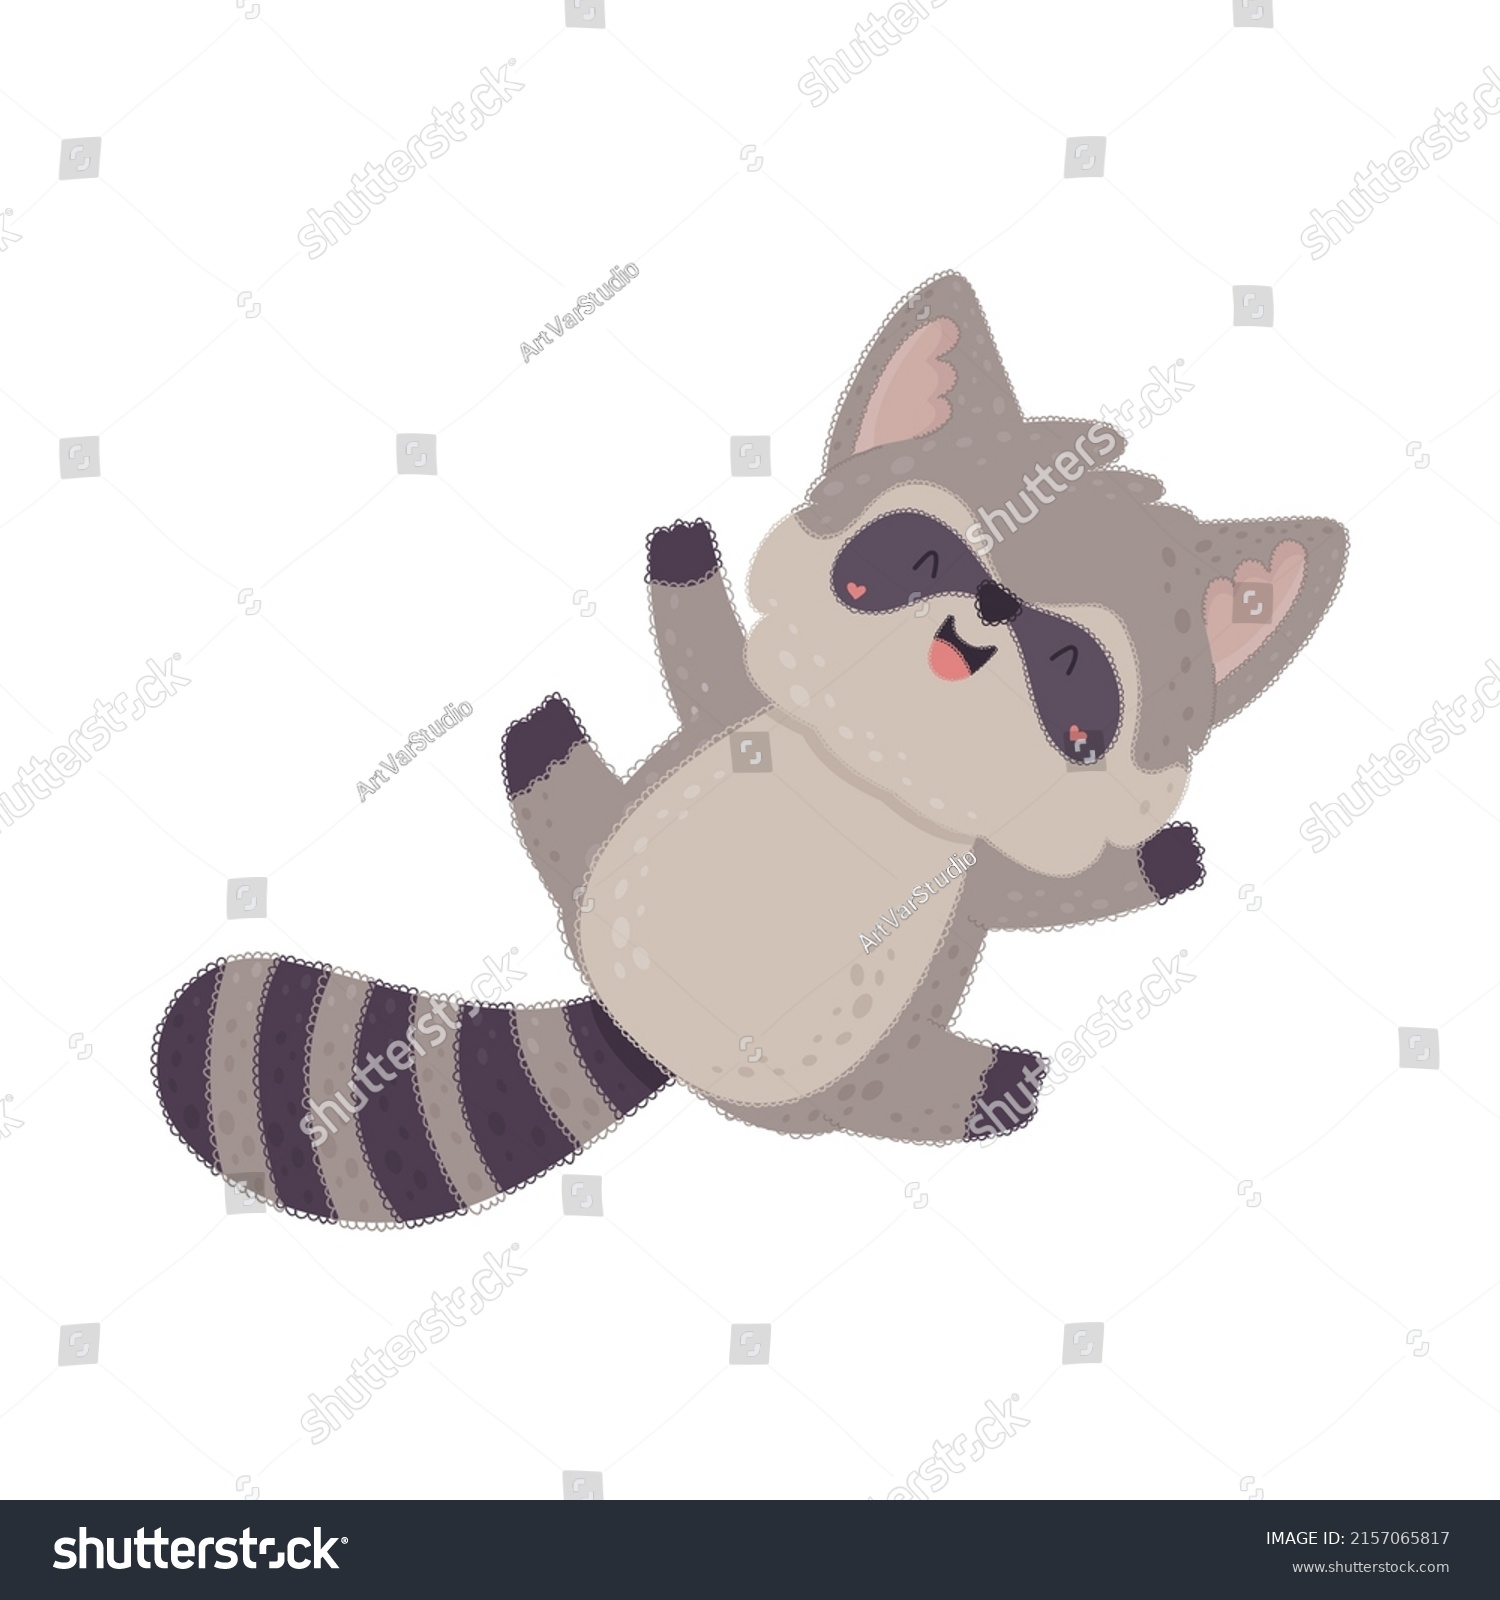 SVG of Cute baby guadeloupe raccoon with a smile. Vector illustration of a cute animal. Cute little illustration of racoon for kids, baby book, fairy tales, covers, baby shower invitation, textile t-shirt. svg